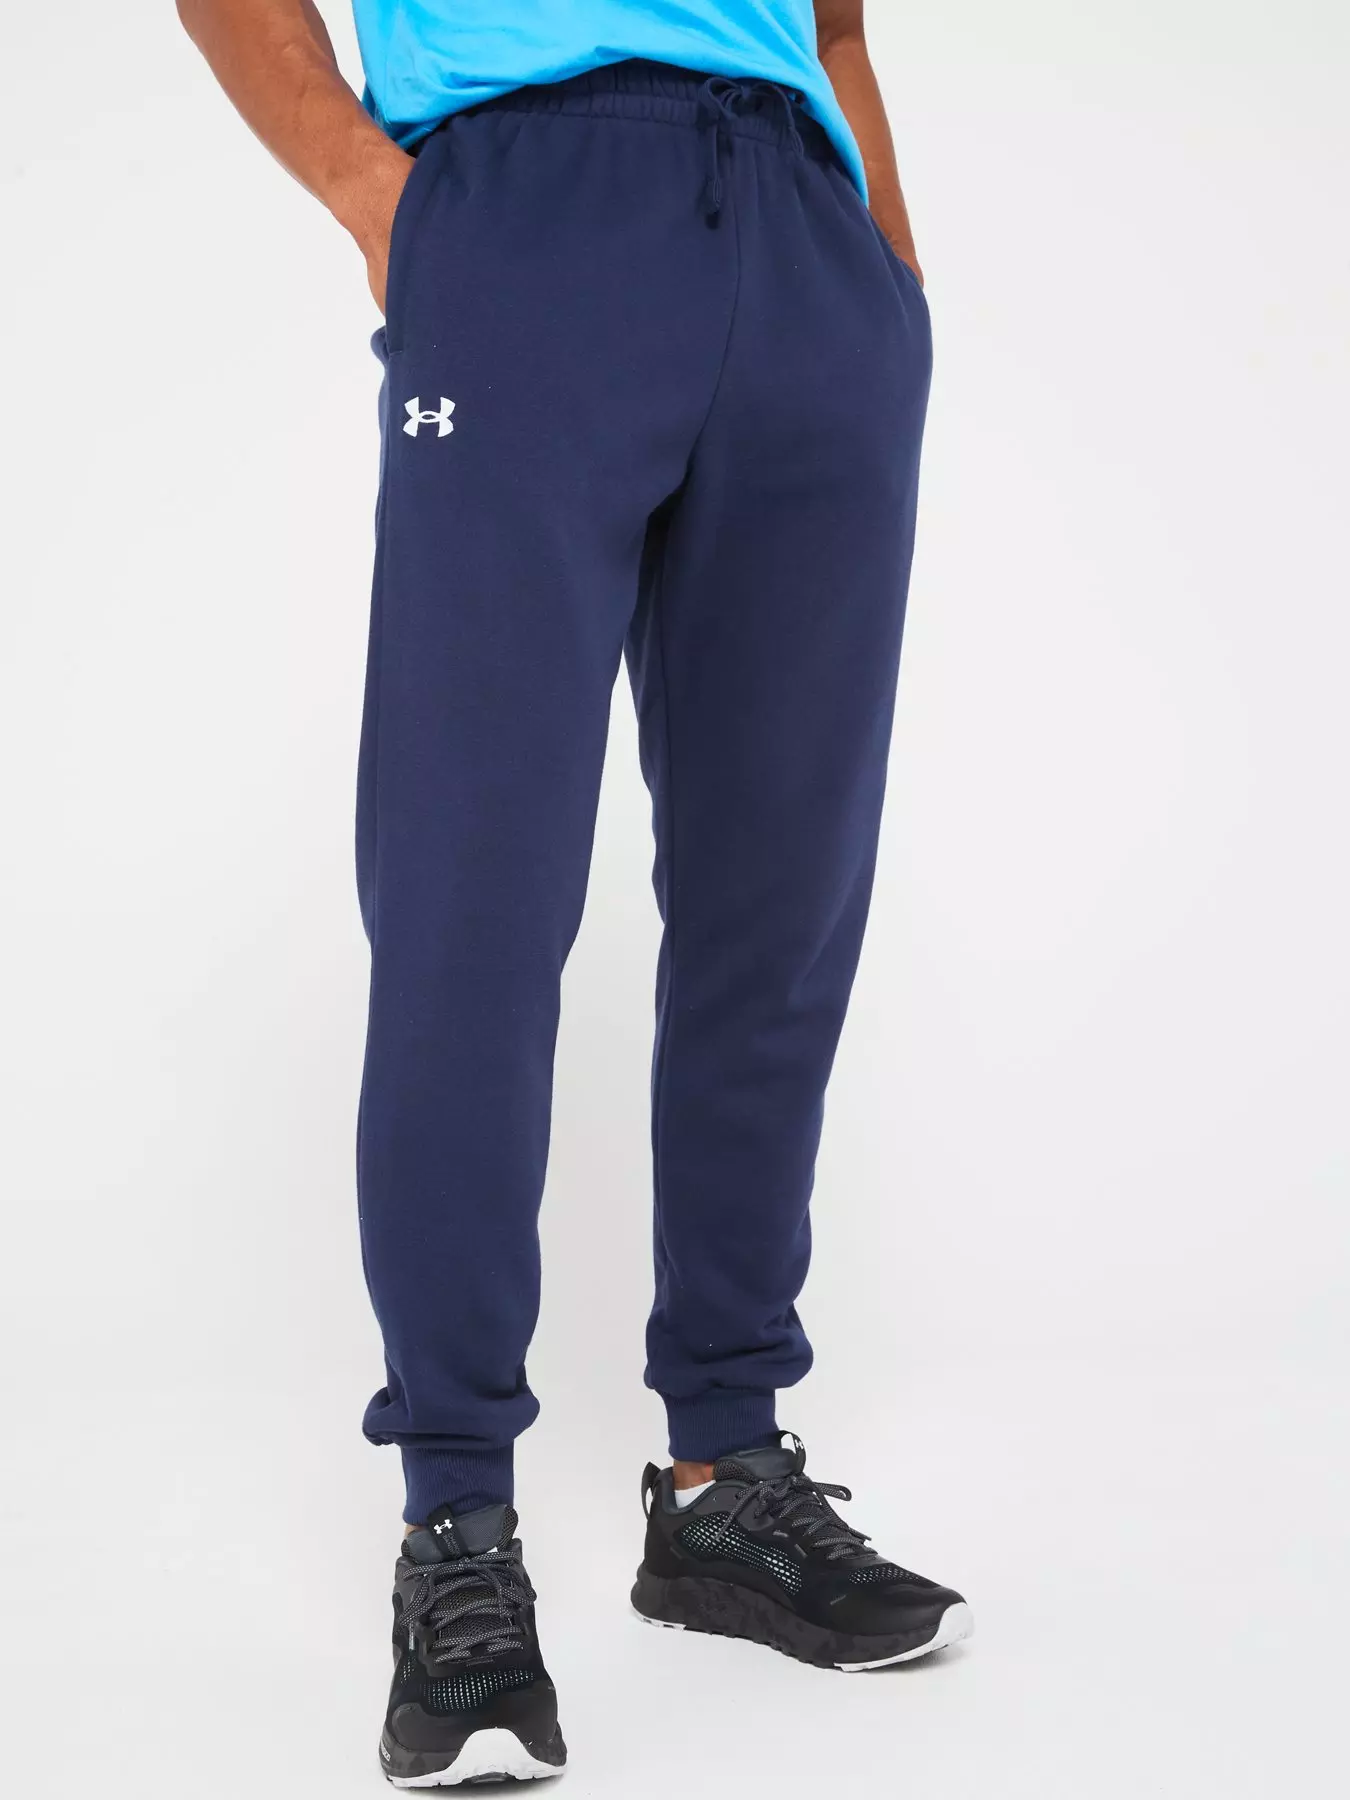 Adidas wind pants/jogger 3stripes Navy, Men's Fashion, Bottoms, Joggers on  Carousell